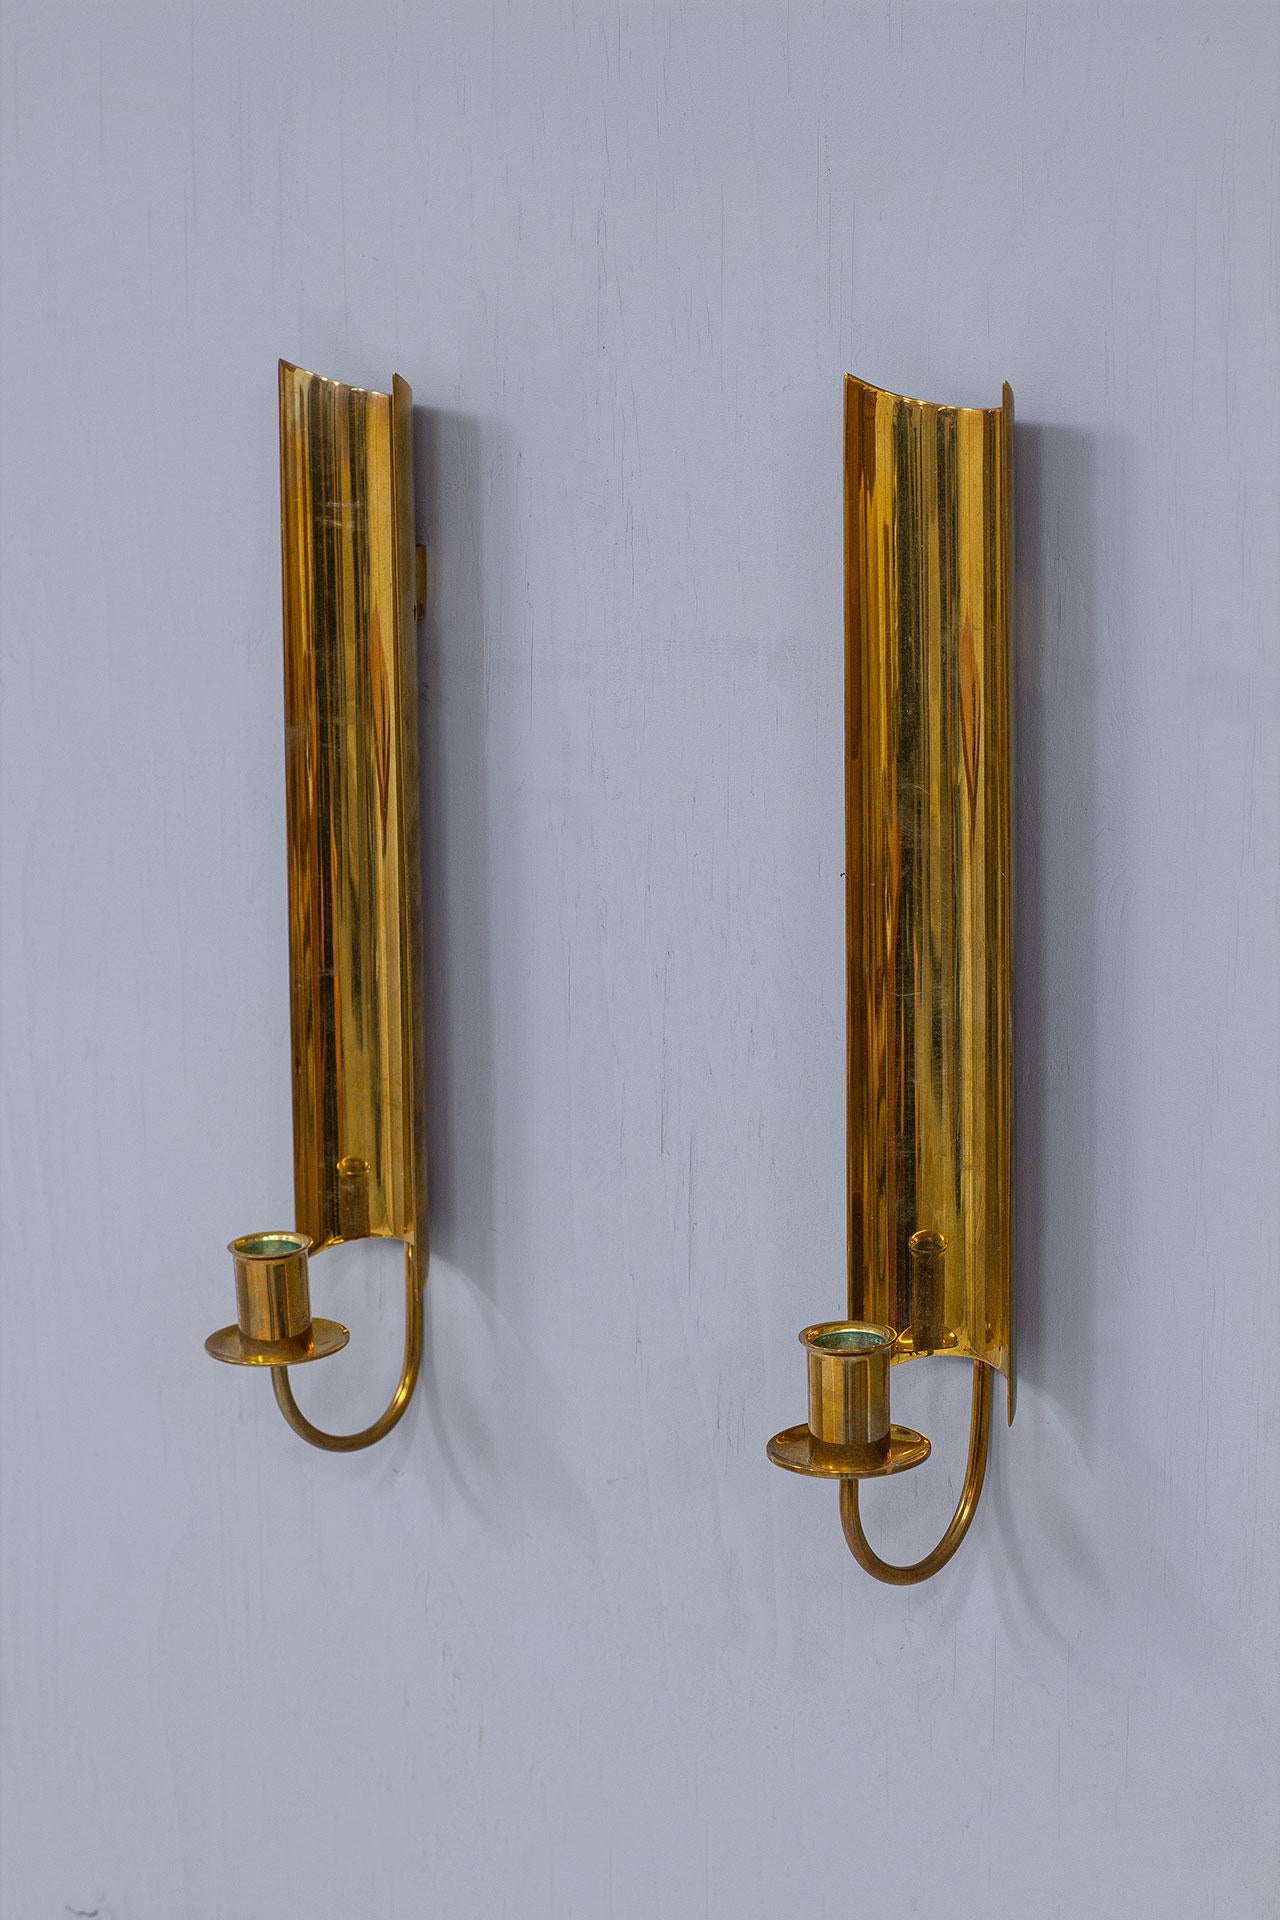 Pair of “Reflex” candlesticks designed by Pierre Forssell during the late 1960s. Manufactured by Skultuna in Sweden. Made from polished brass. 

Vintage items in very good patinated condition.
The pair can be polished on demand.